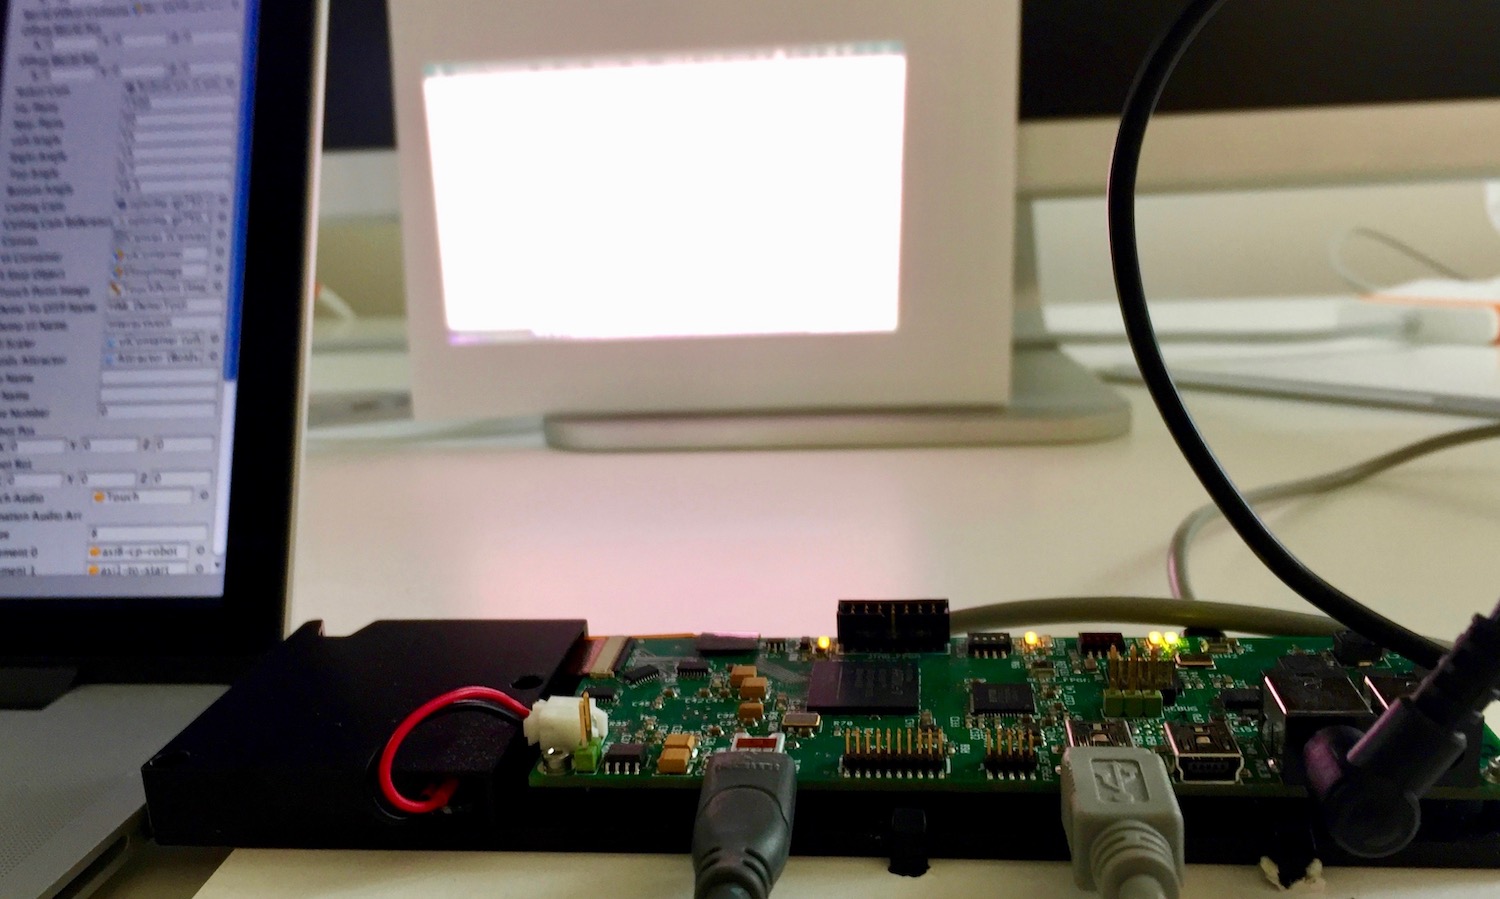 Laser Projector prototype displaying an image.